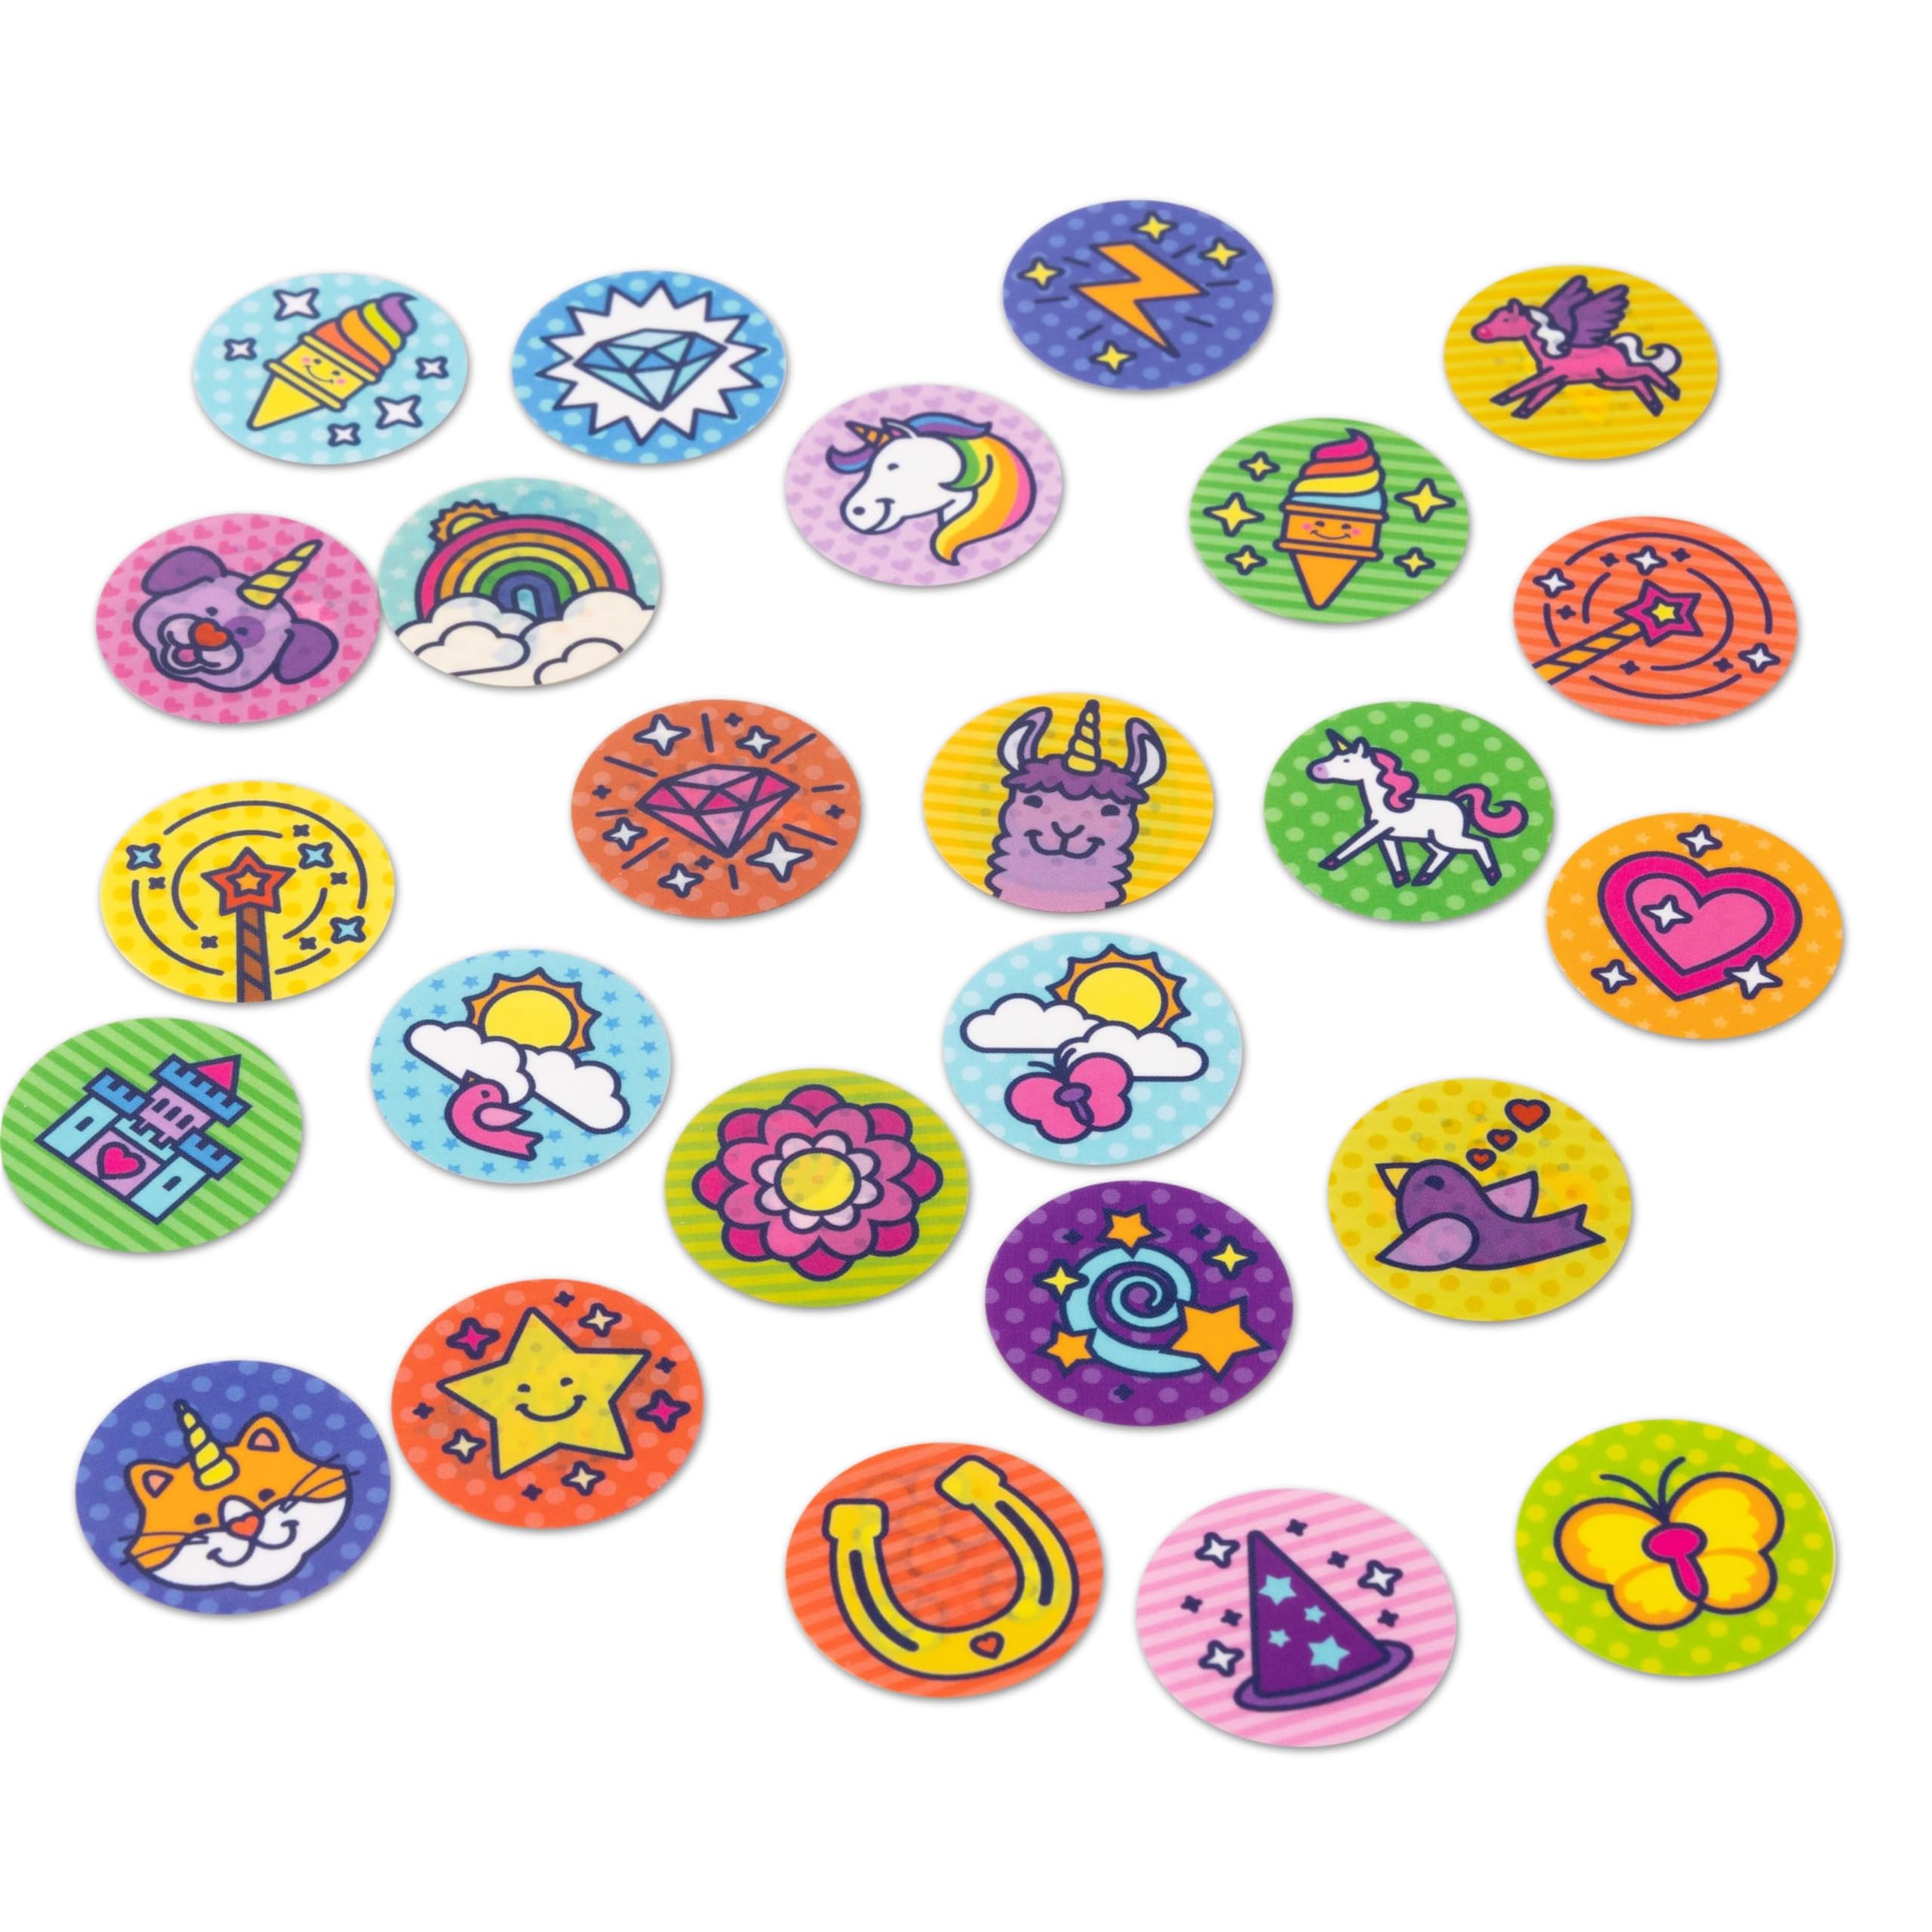 Melissa & Doug Sticker WOW!™ 300+ Refill Stickers for Sticker Stamper Arts and Crafts Fidget Toy Collectibles – Unicorn Fantasy Theme, Assorted (Stickers Only) Removable Stickers for Girls and Boys 3+